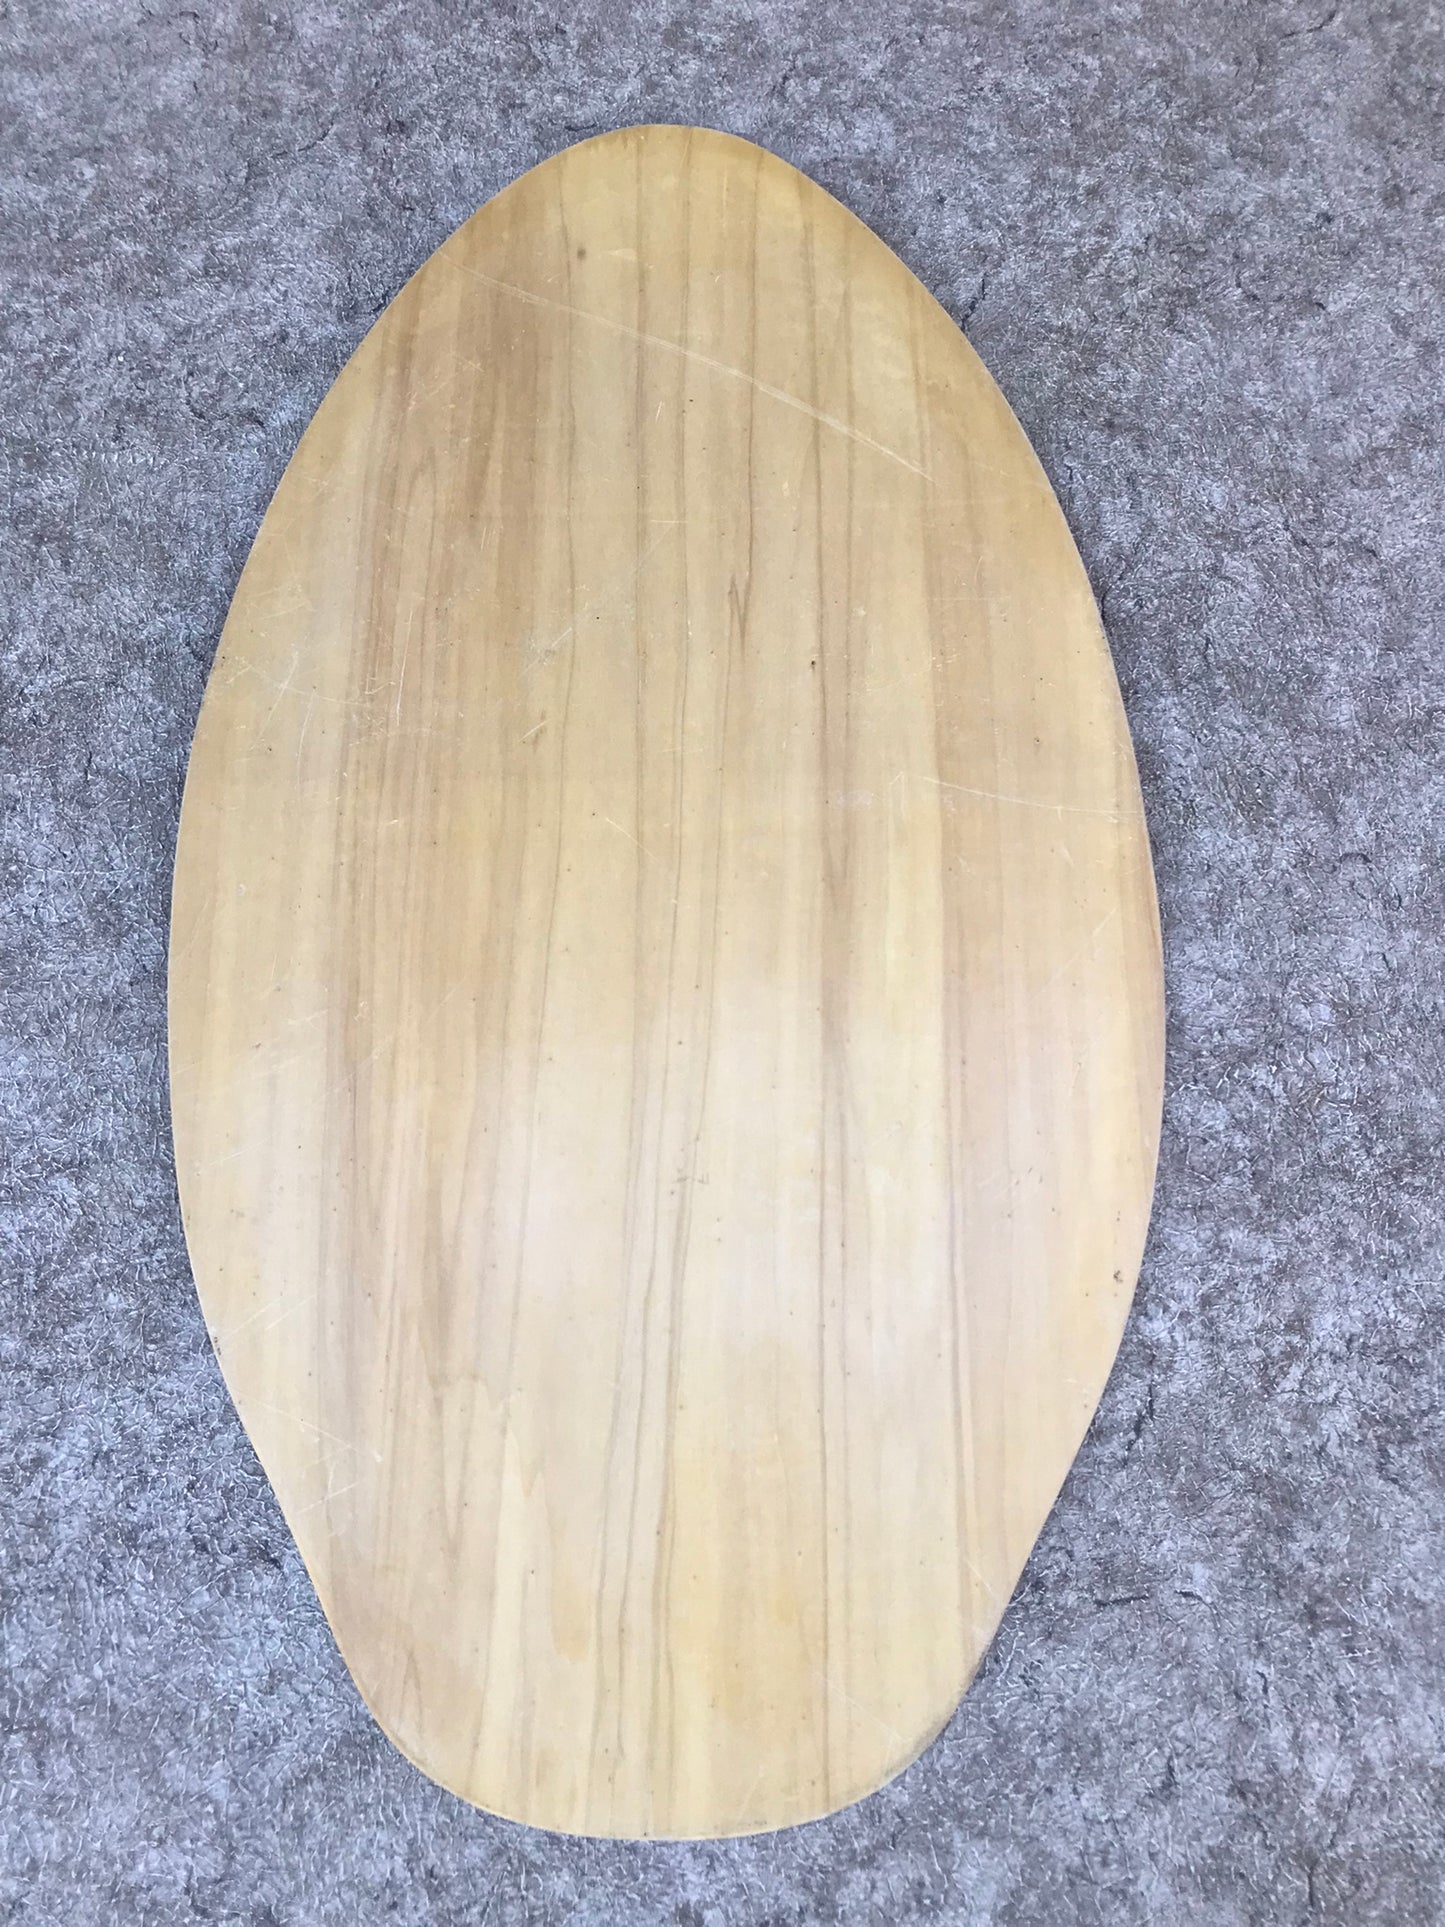 Surf SkimBoard Wood Blue Red Hawii Excellent Condition 35 x 20 inch